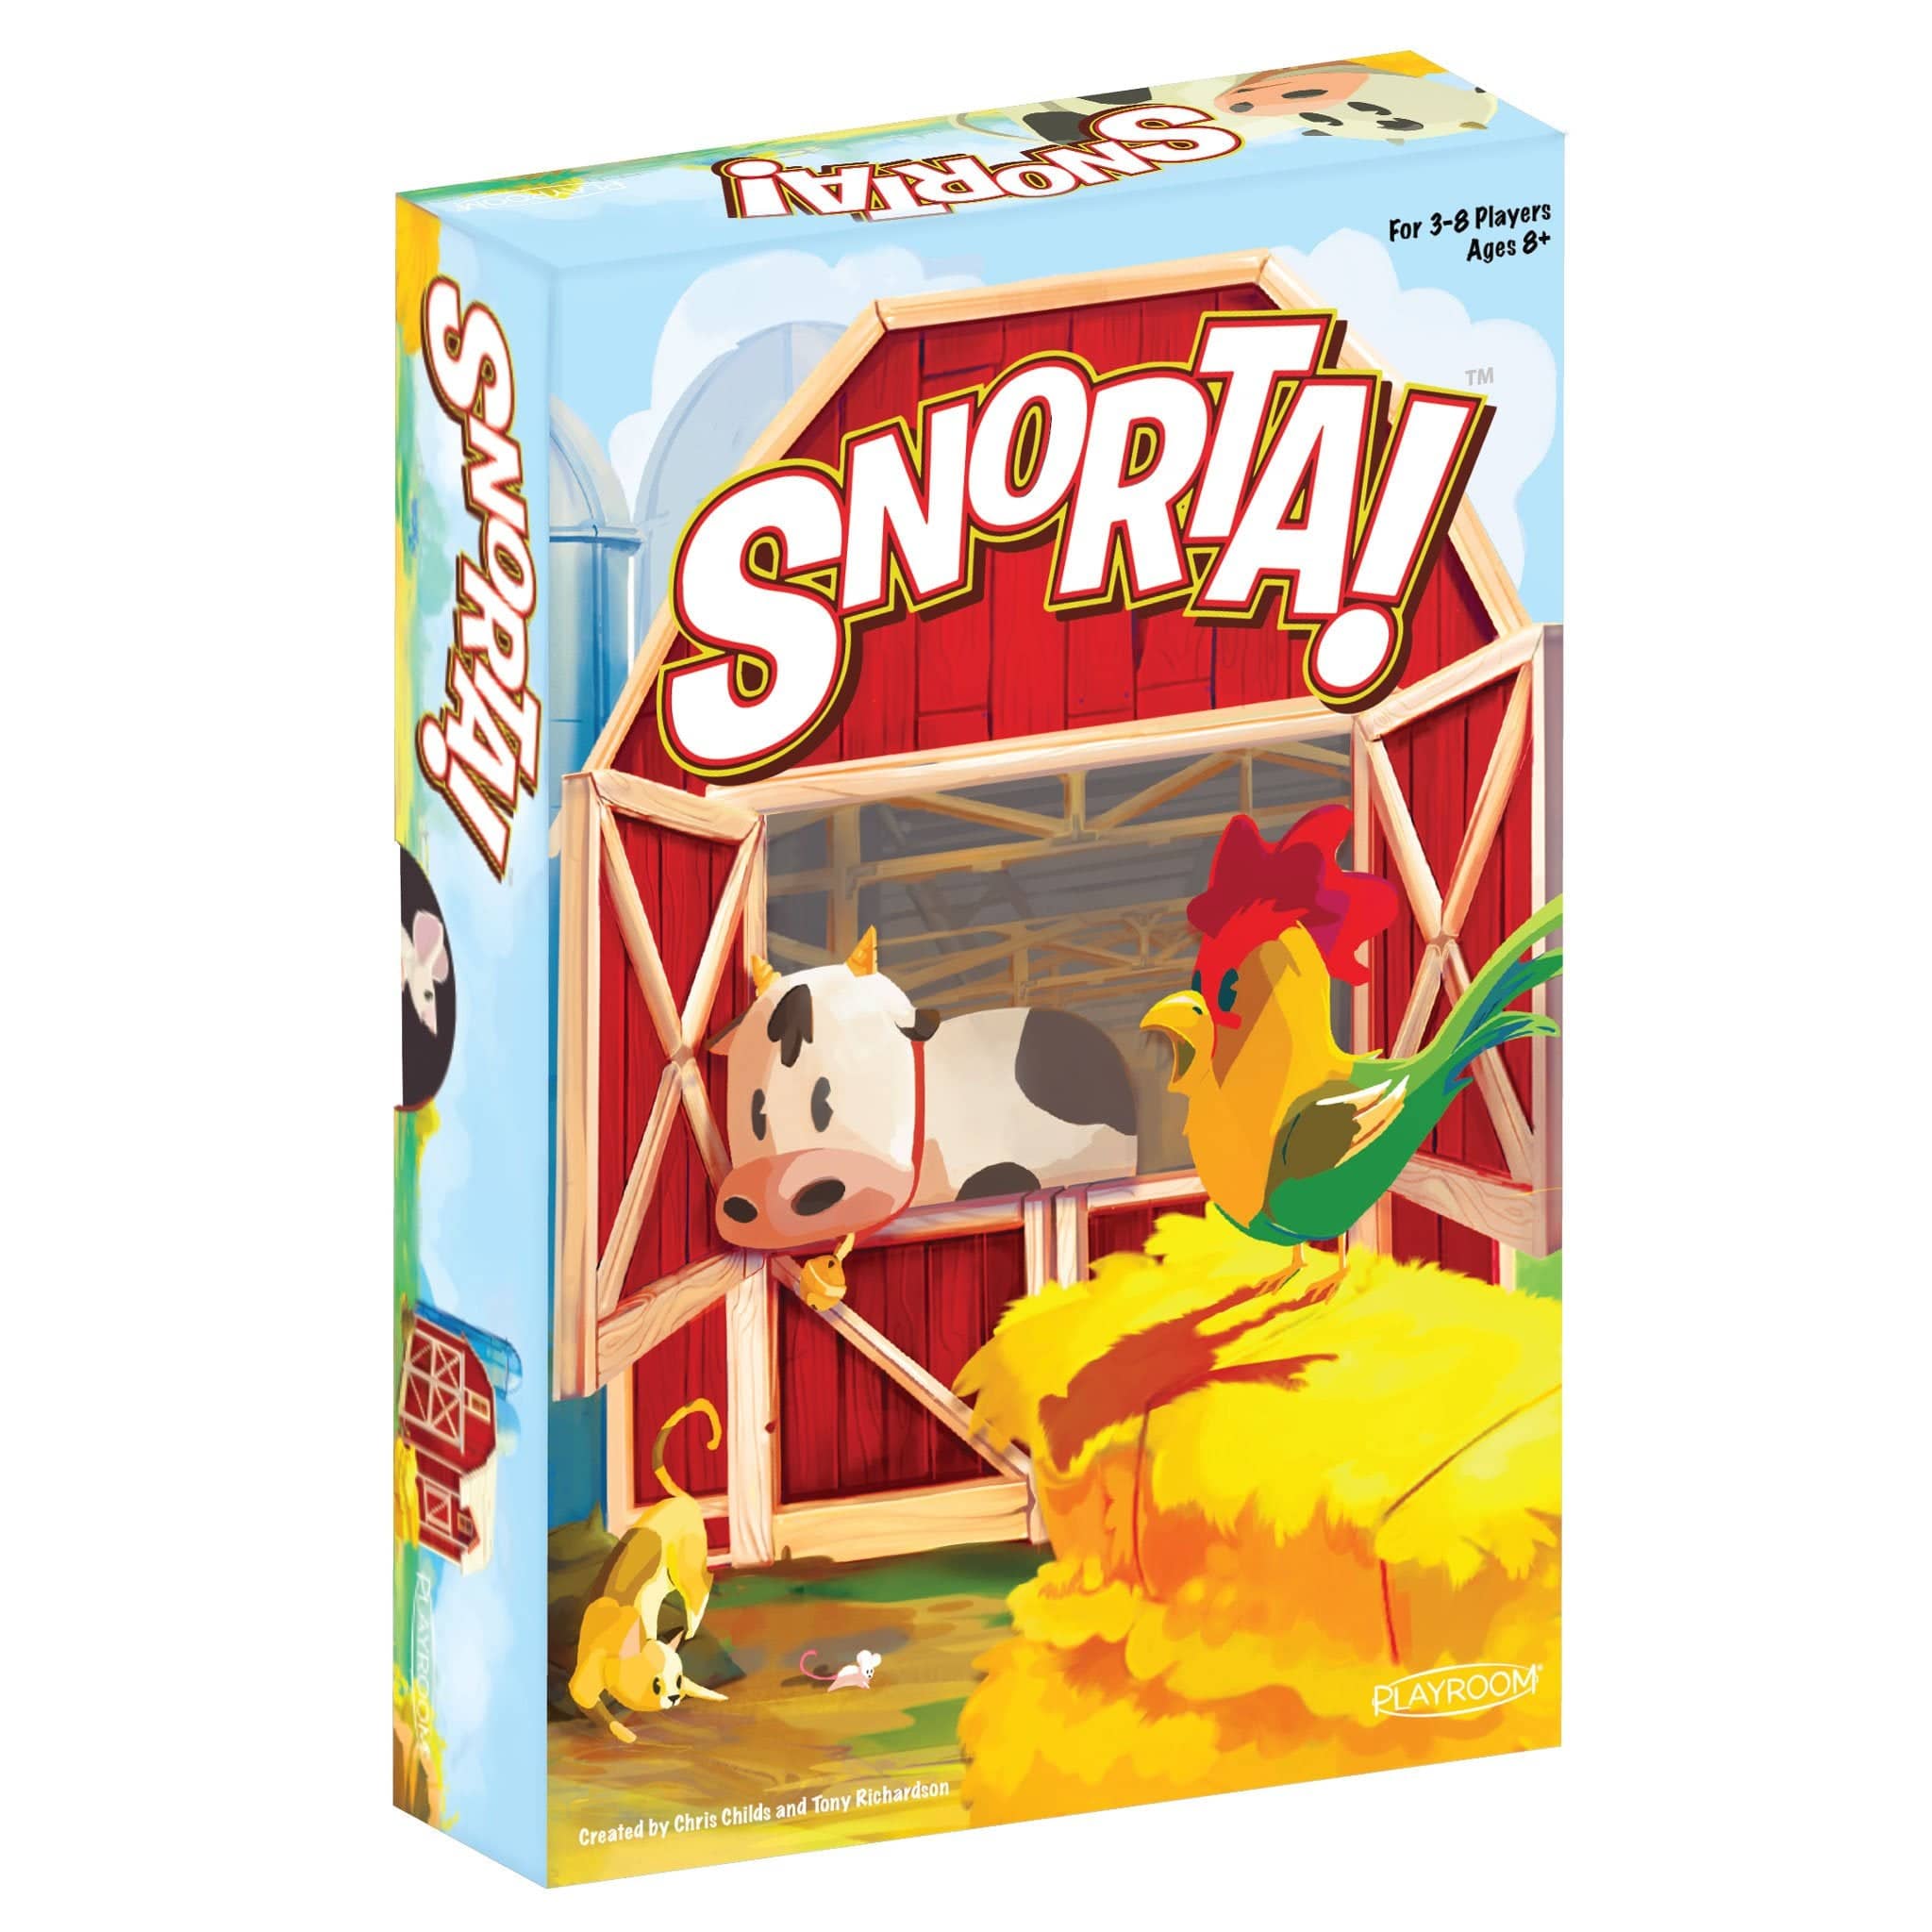 Snorta! | A hilarious family game for ages 6 and up | Ultra PRO Entertainment